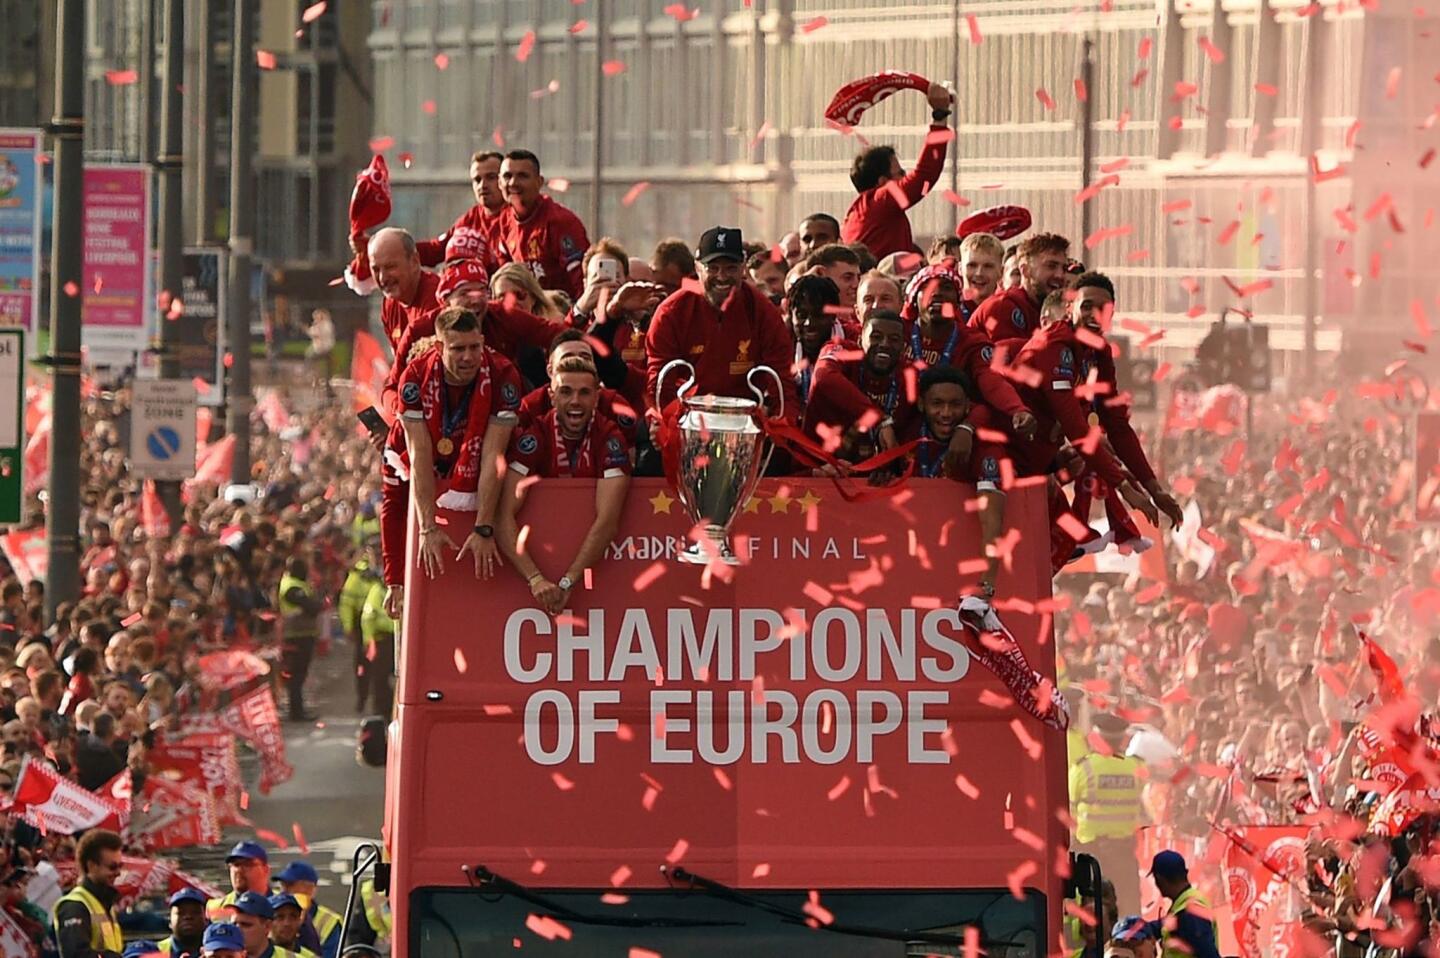 Liverpool's German manager Jurgen Klopp (C) holds the European Champion Clubs' Cup trophy during an open-top bus parade around Liverpool, north-west England on June 2, 2019, after winning the UEFA Champions League final football match between Liverpool and Tottenham. - Liverpool's celebrations stretched long into the night after they became six-time European champions with goals from Mohamed Salah and Divock Origi to beat Tottenham -- and the party was set to move to England on Sunday where tens of thousands of fans awaited the team's return. The 2-0 win in the sweltering Metropolitano Stadium delivered a first trophy in seven years for Liverpool, and -- finally -- a first win in seven finals for coach Jurgen Klopp. (Photo by Oli SCARFF / AFP)OLI SCARFF/AFP/Getty Images ** OUTS - ELSENT, FPG, CM - OUTS * NM, PH, VA if sourced by CT, LA or MoD **